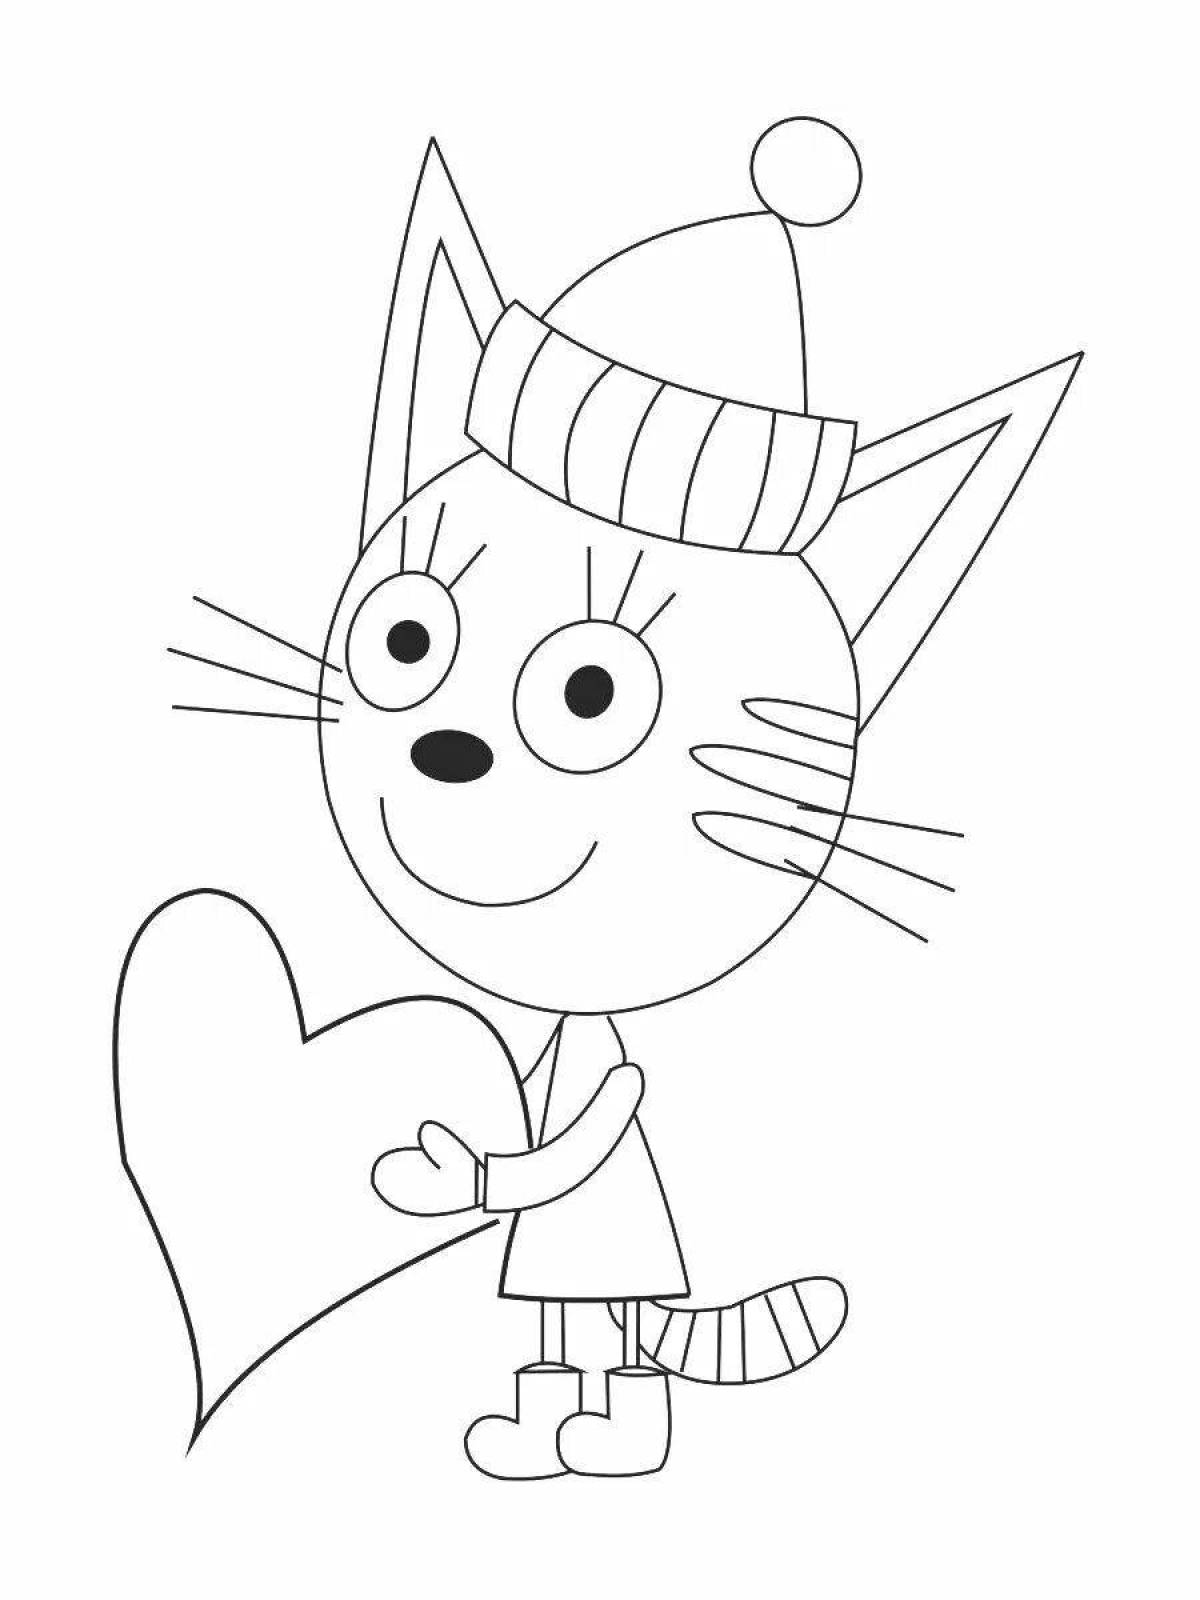 3 cats adorable coloring book for boys